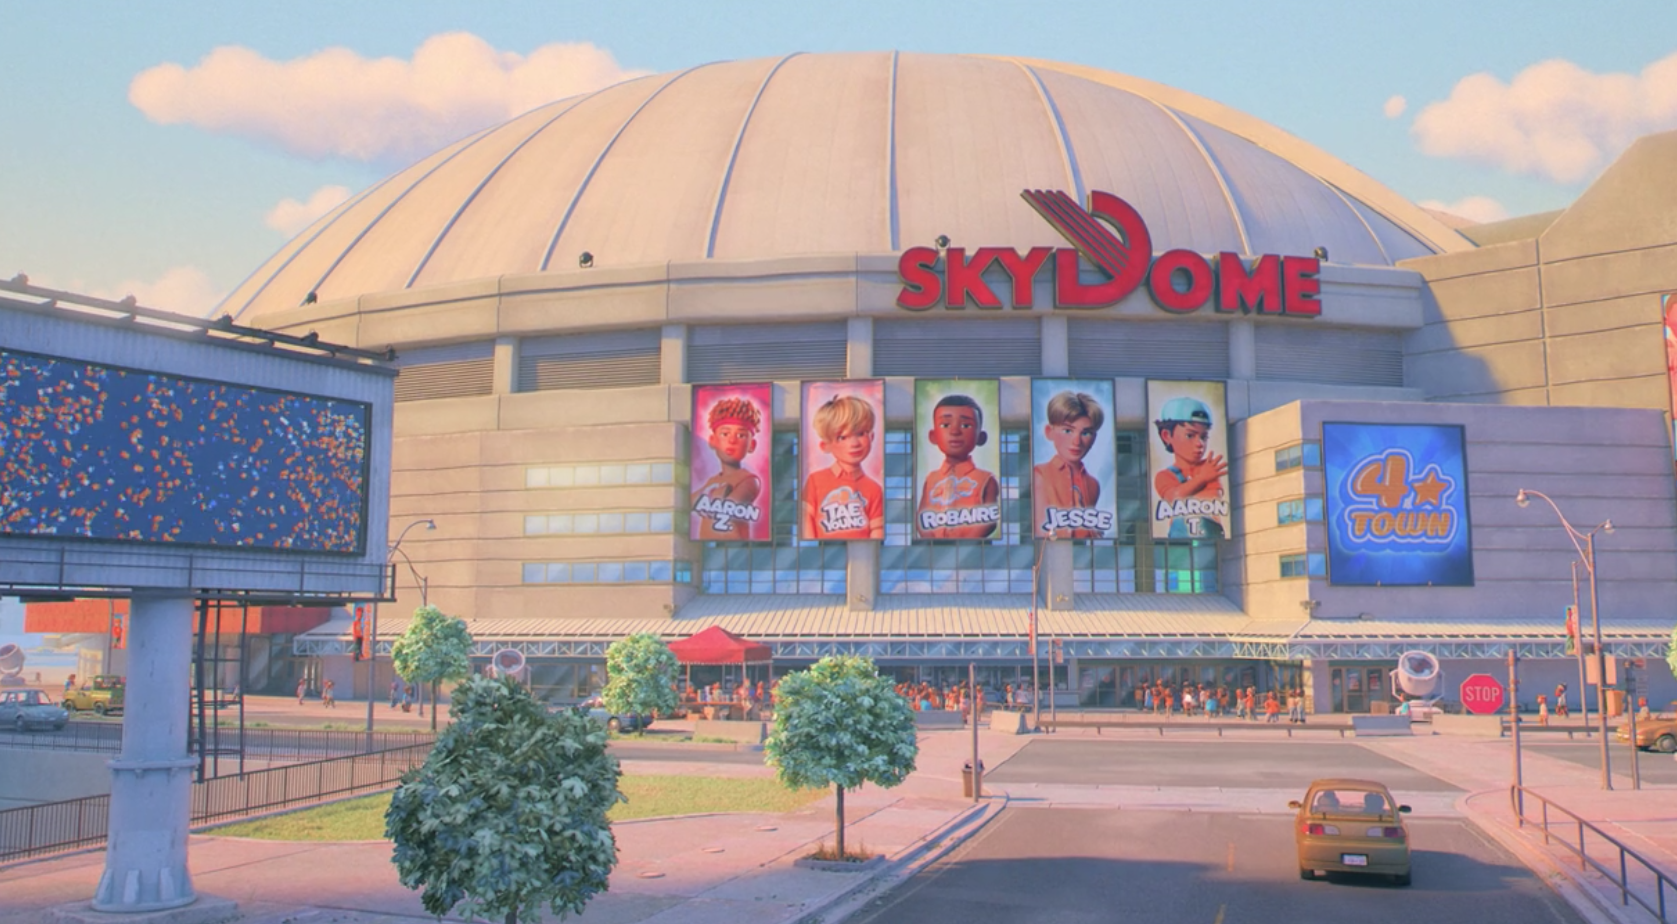 An animation of the outside of Toronto&#x27;s SkyDome where photos of the boy band &quot;4*Town&quot; hang up on the outside of the building